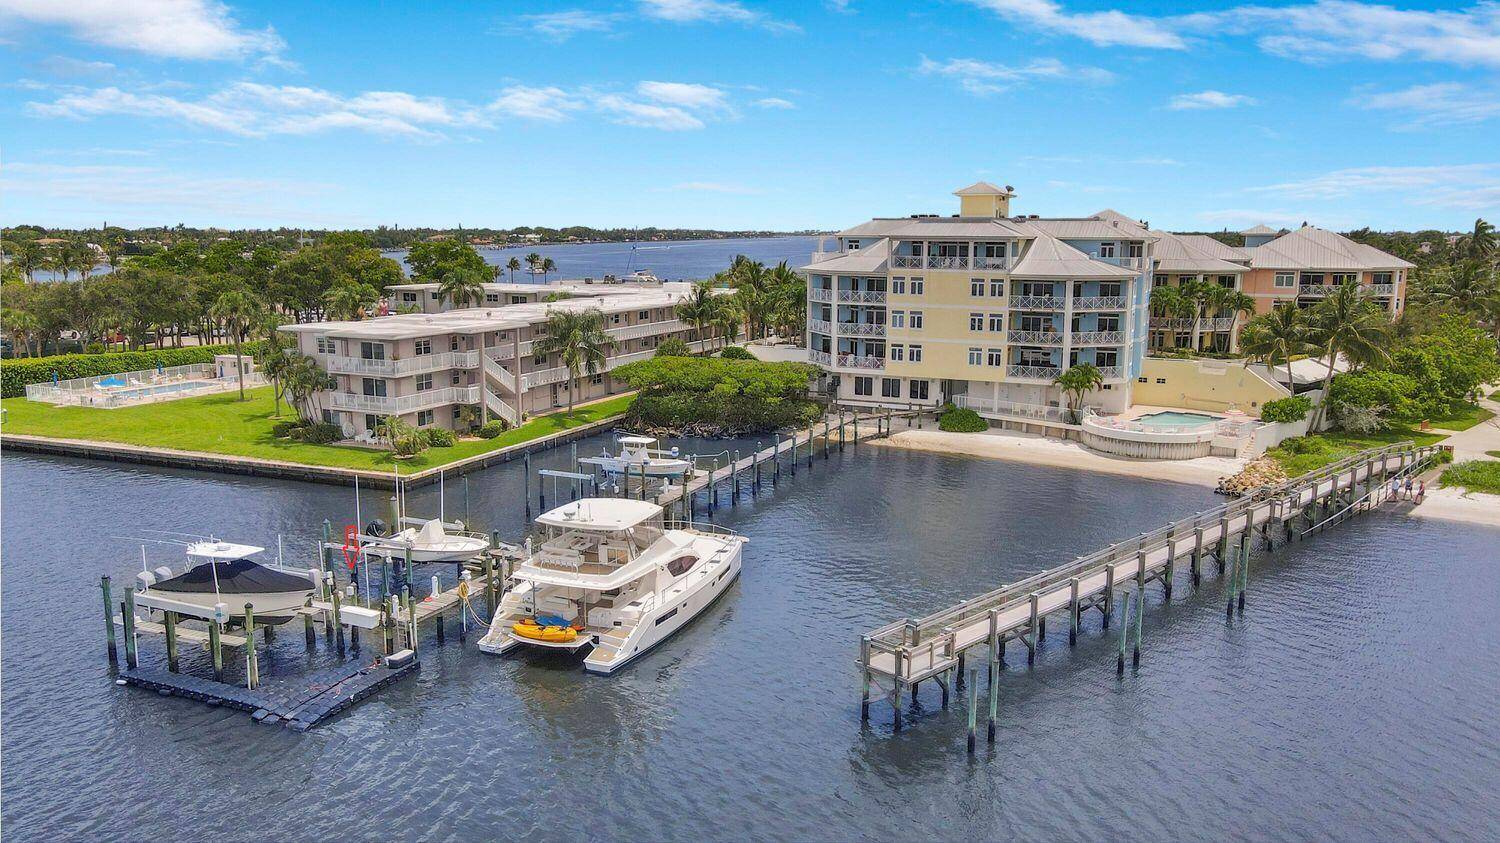 Luxurious Waterfront Condo in Olde Village Pointe A Boater's Dream with Panoramic Intracoastal ViewsExperience the pinnacle of waterfront living in this stunning Olde Village Pointe condominium, ideally located within walking ...